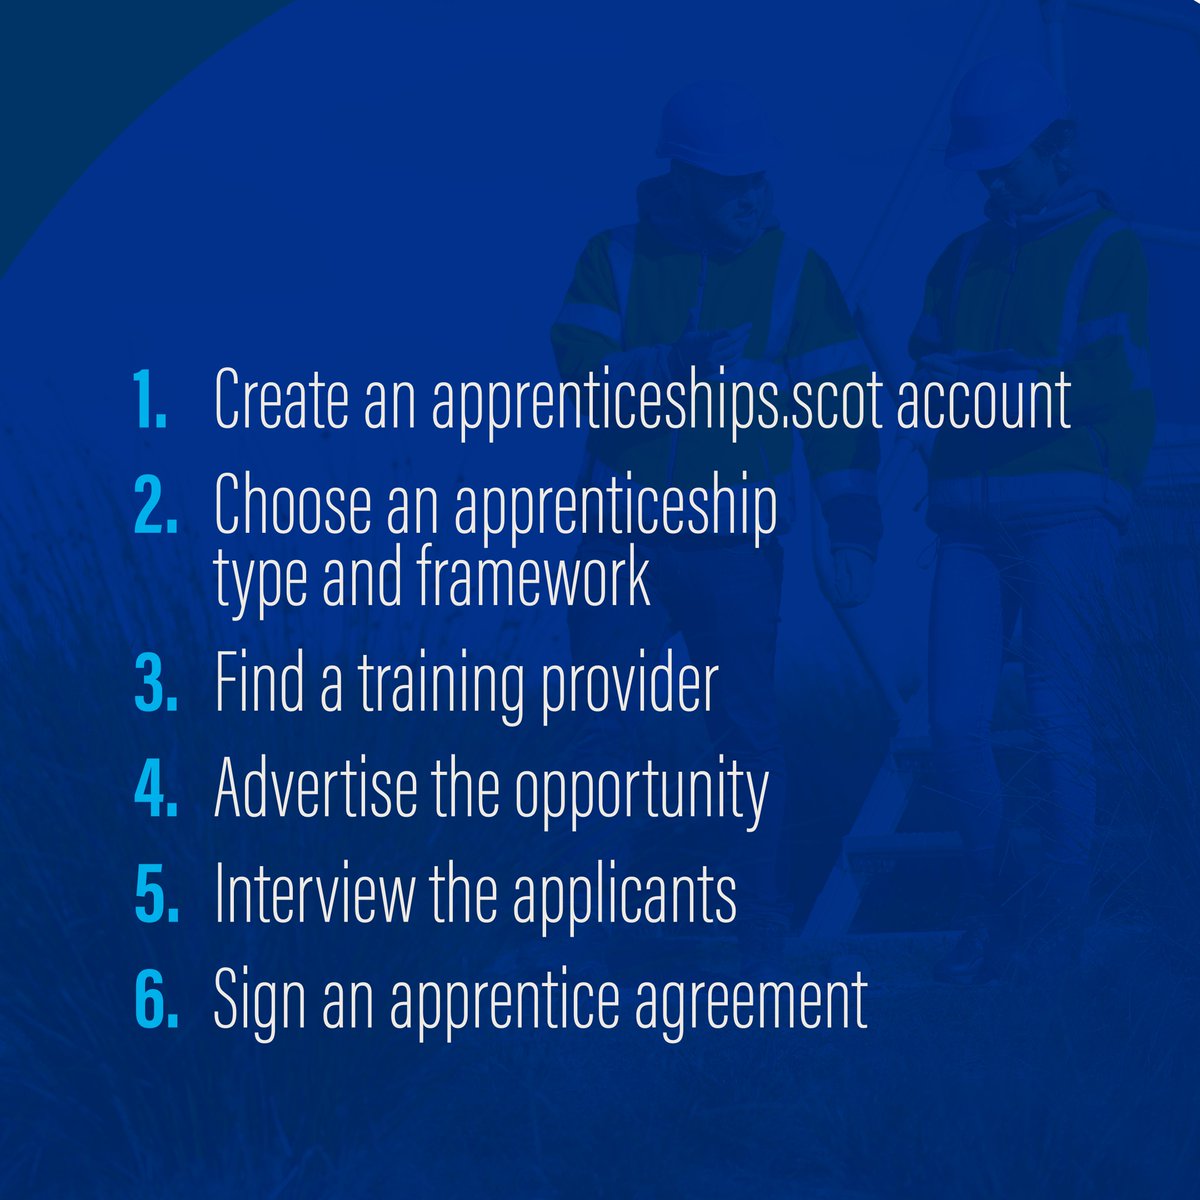 How to hire an apprentice in Scotland made simple. Follow these 6 steps👇 More info here: bit.ly/3YnAnuM #ScotAppWeek24